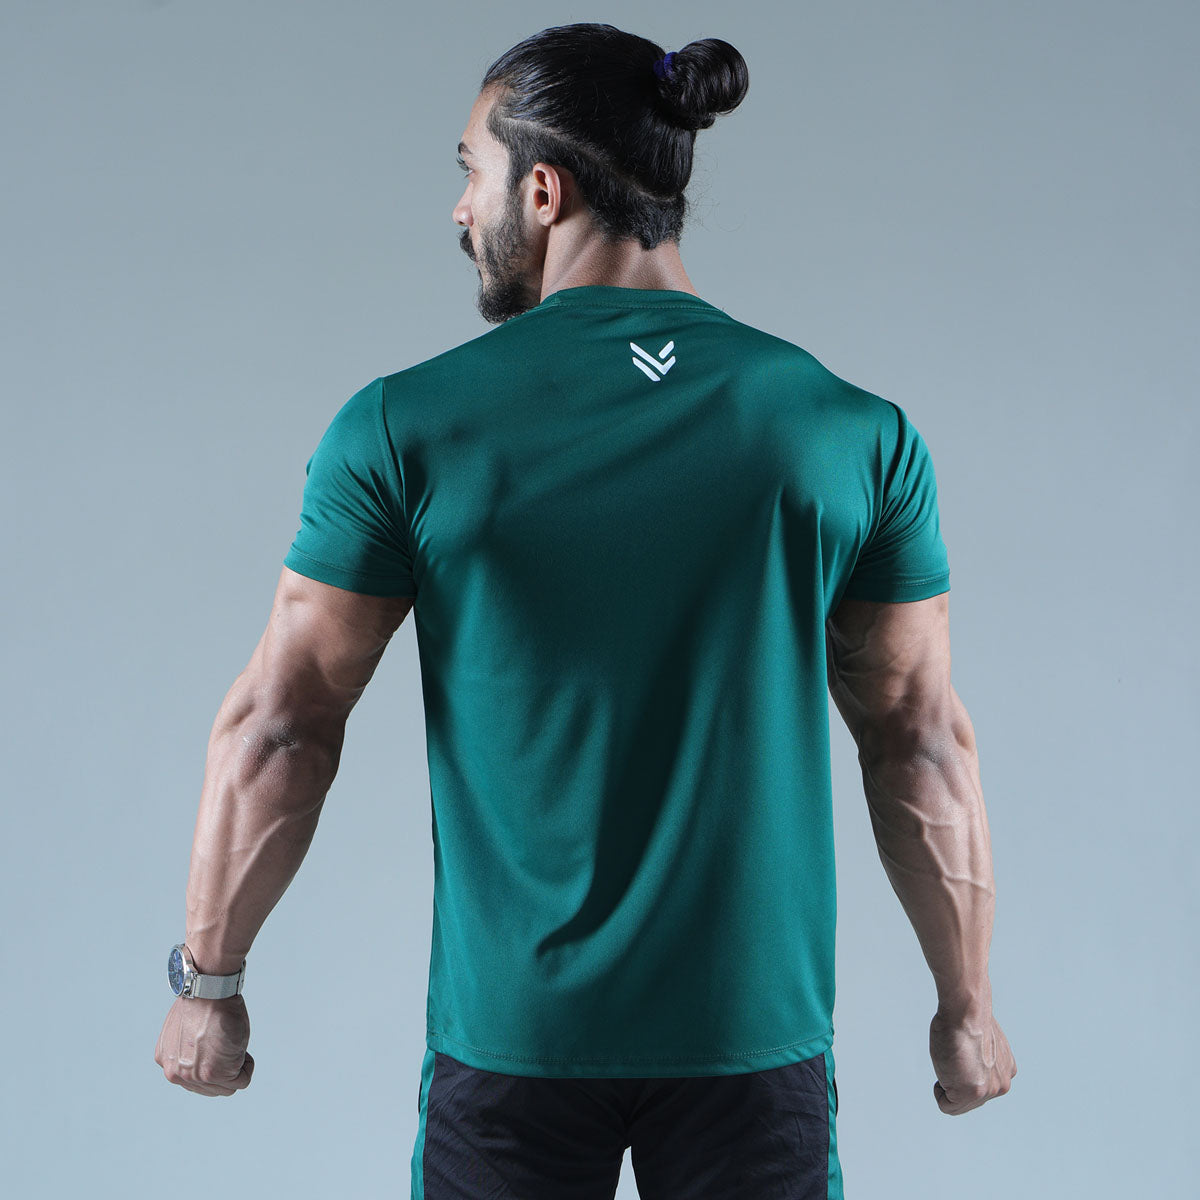 Pine RUNNER COMPRESSION TEE